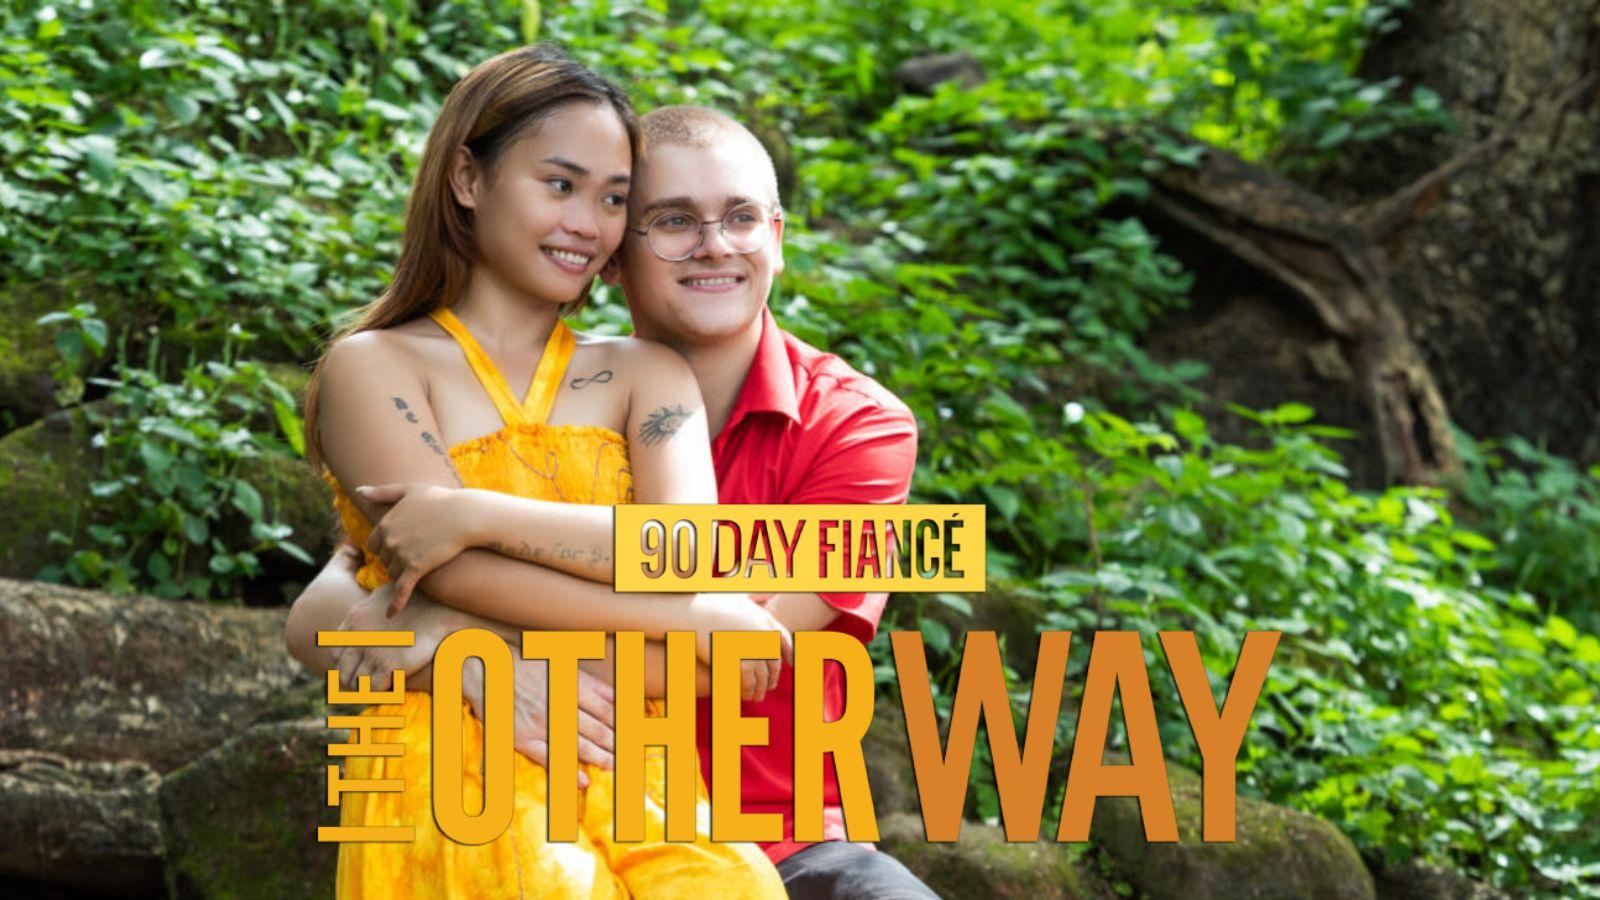 Brandan and Mary from 90 Day Fiancé: The Other Way